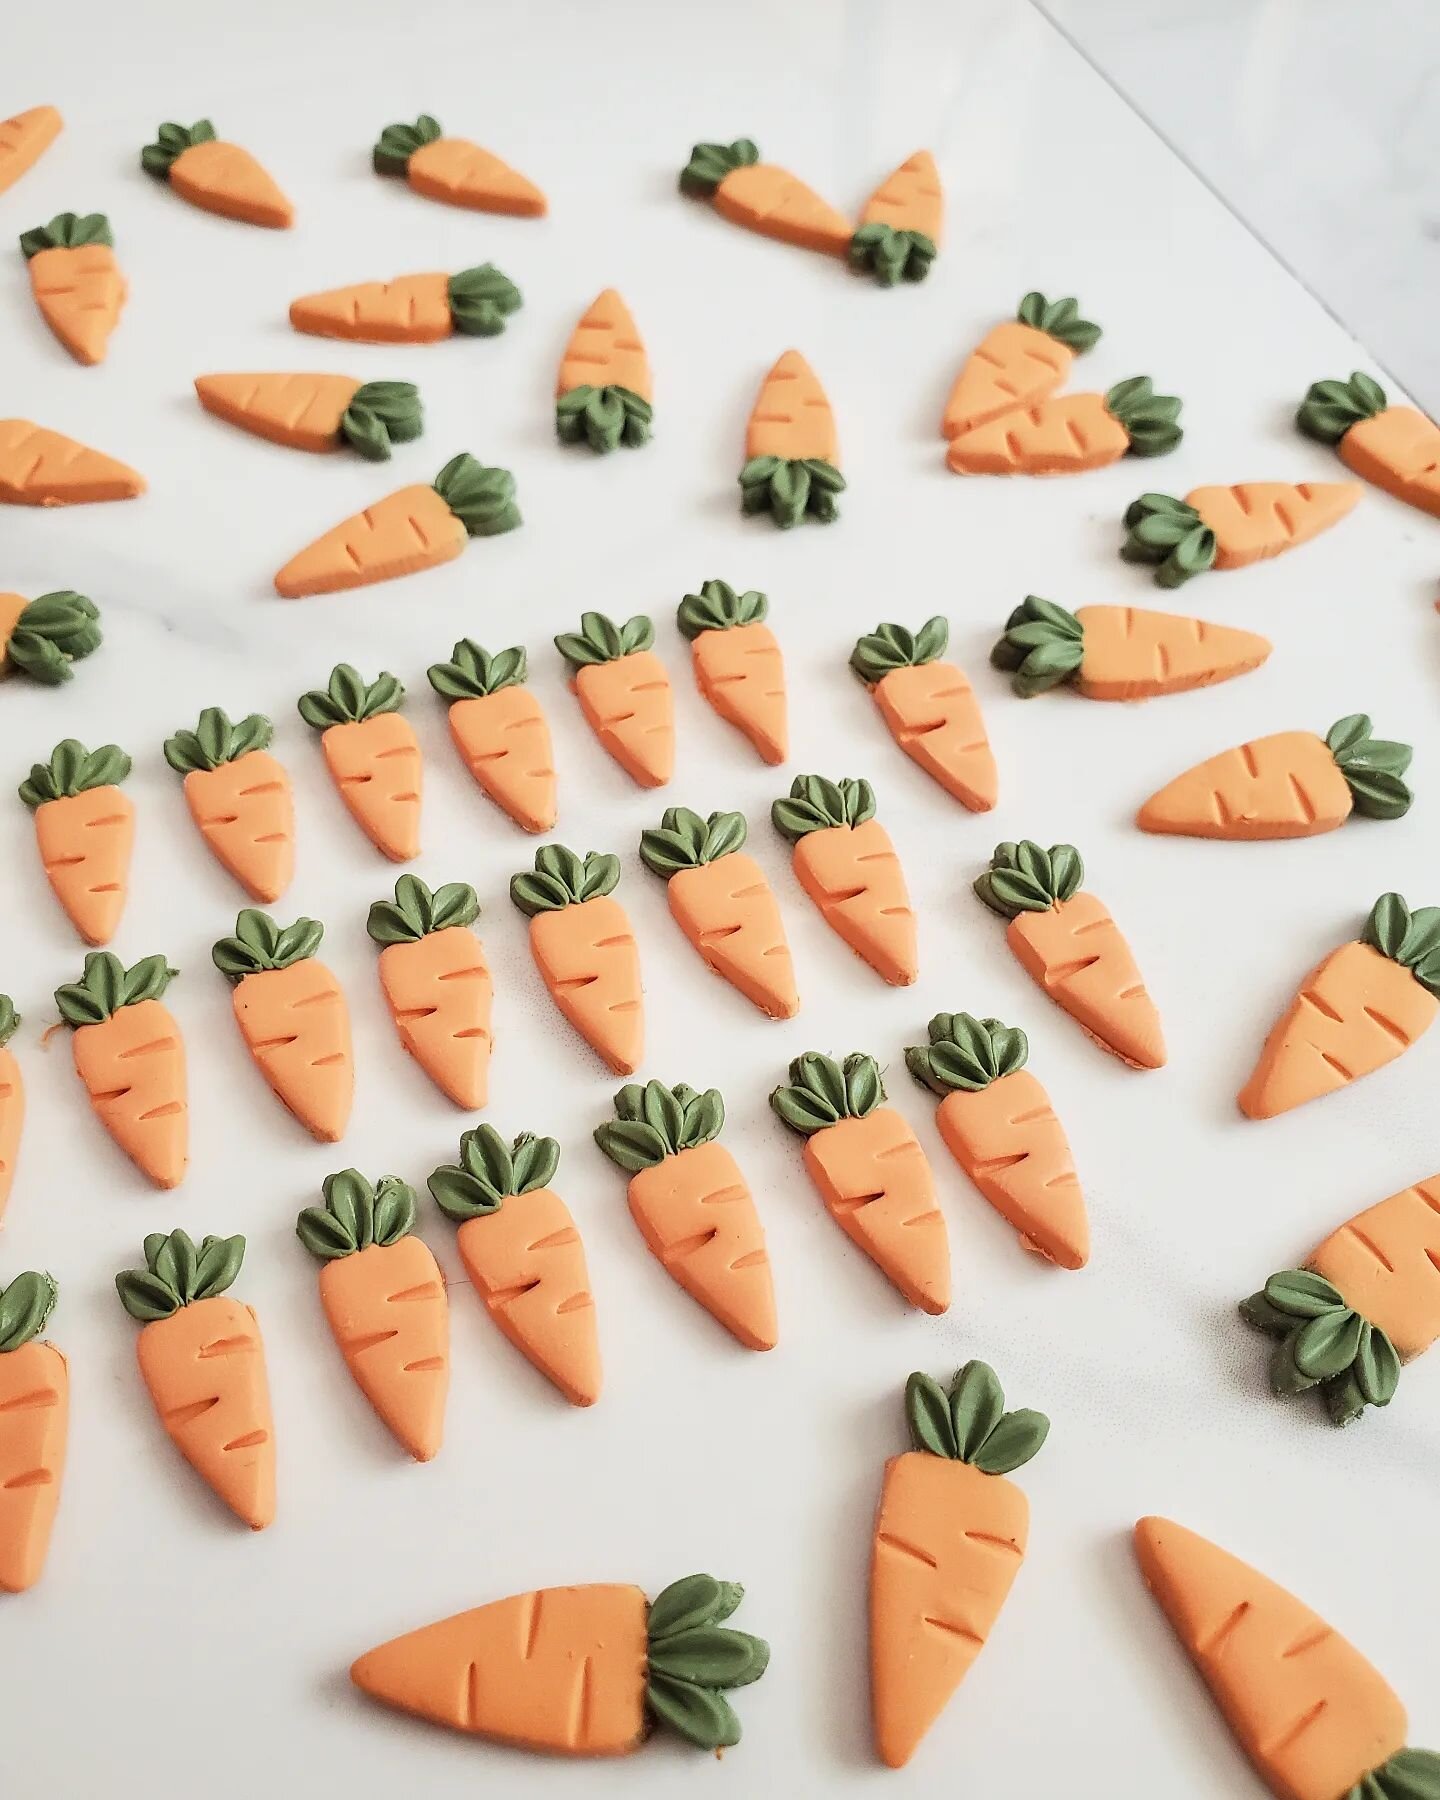 Working on some carrots studs and dangles 🥕🥕

Spring Collection coming 03/15 (FRIDAY) 🌱🥕